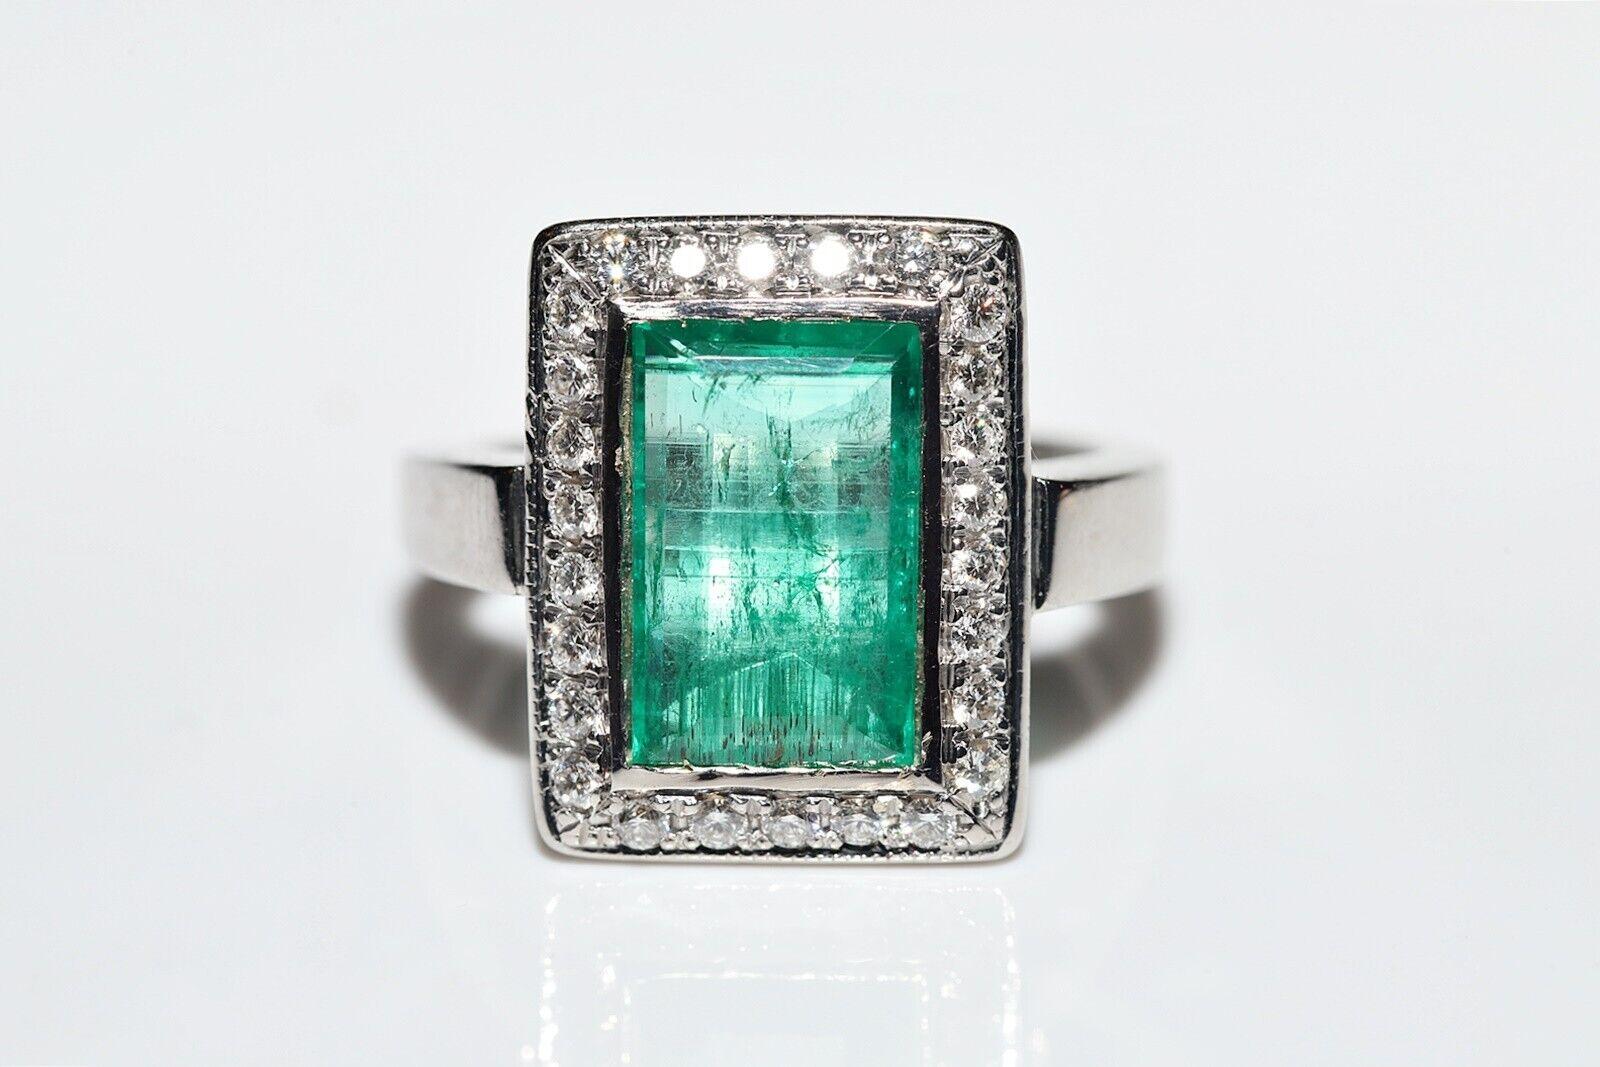 Retro Vintage Circa 1980s 18k Gold Natural Diamond And Emerald Decorated Ring For Sale